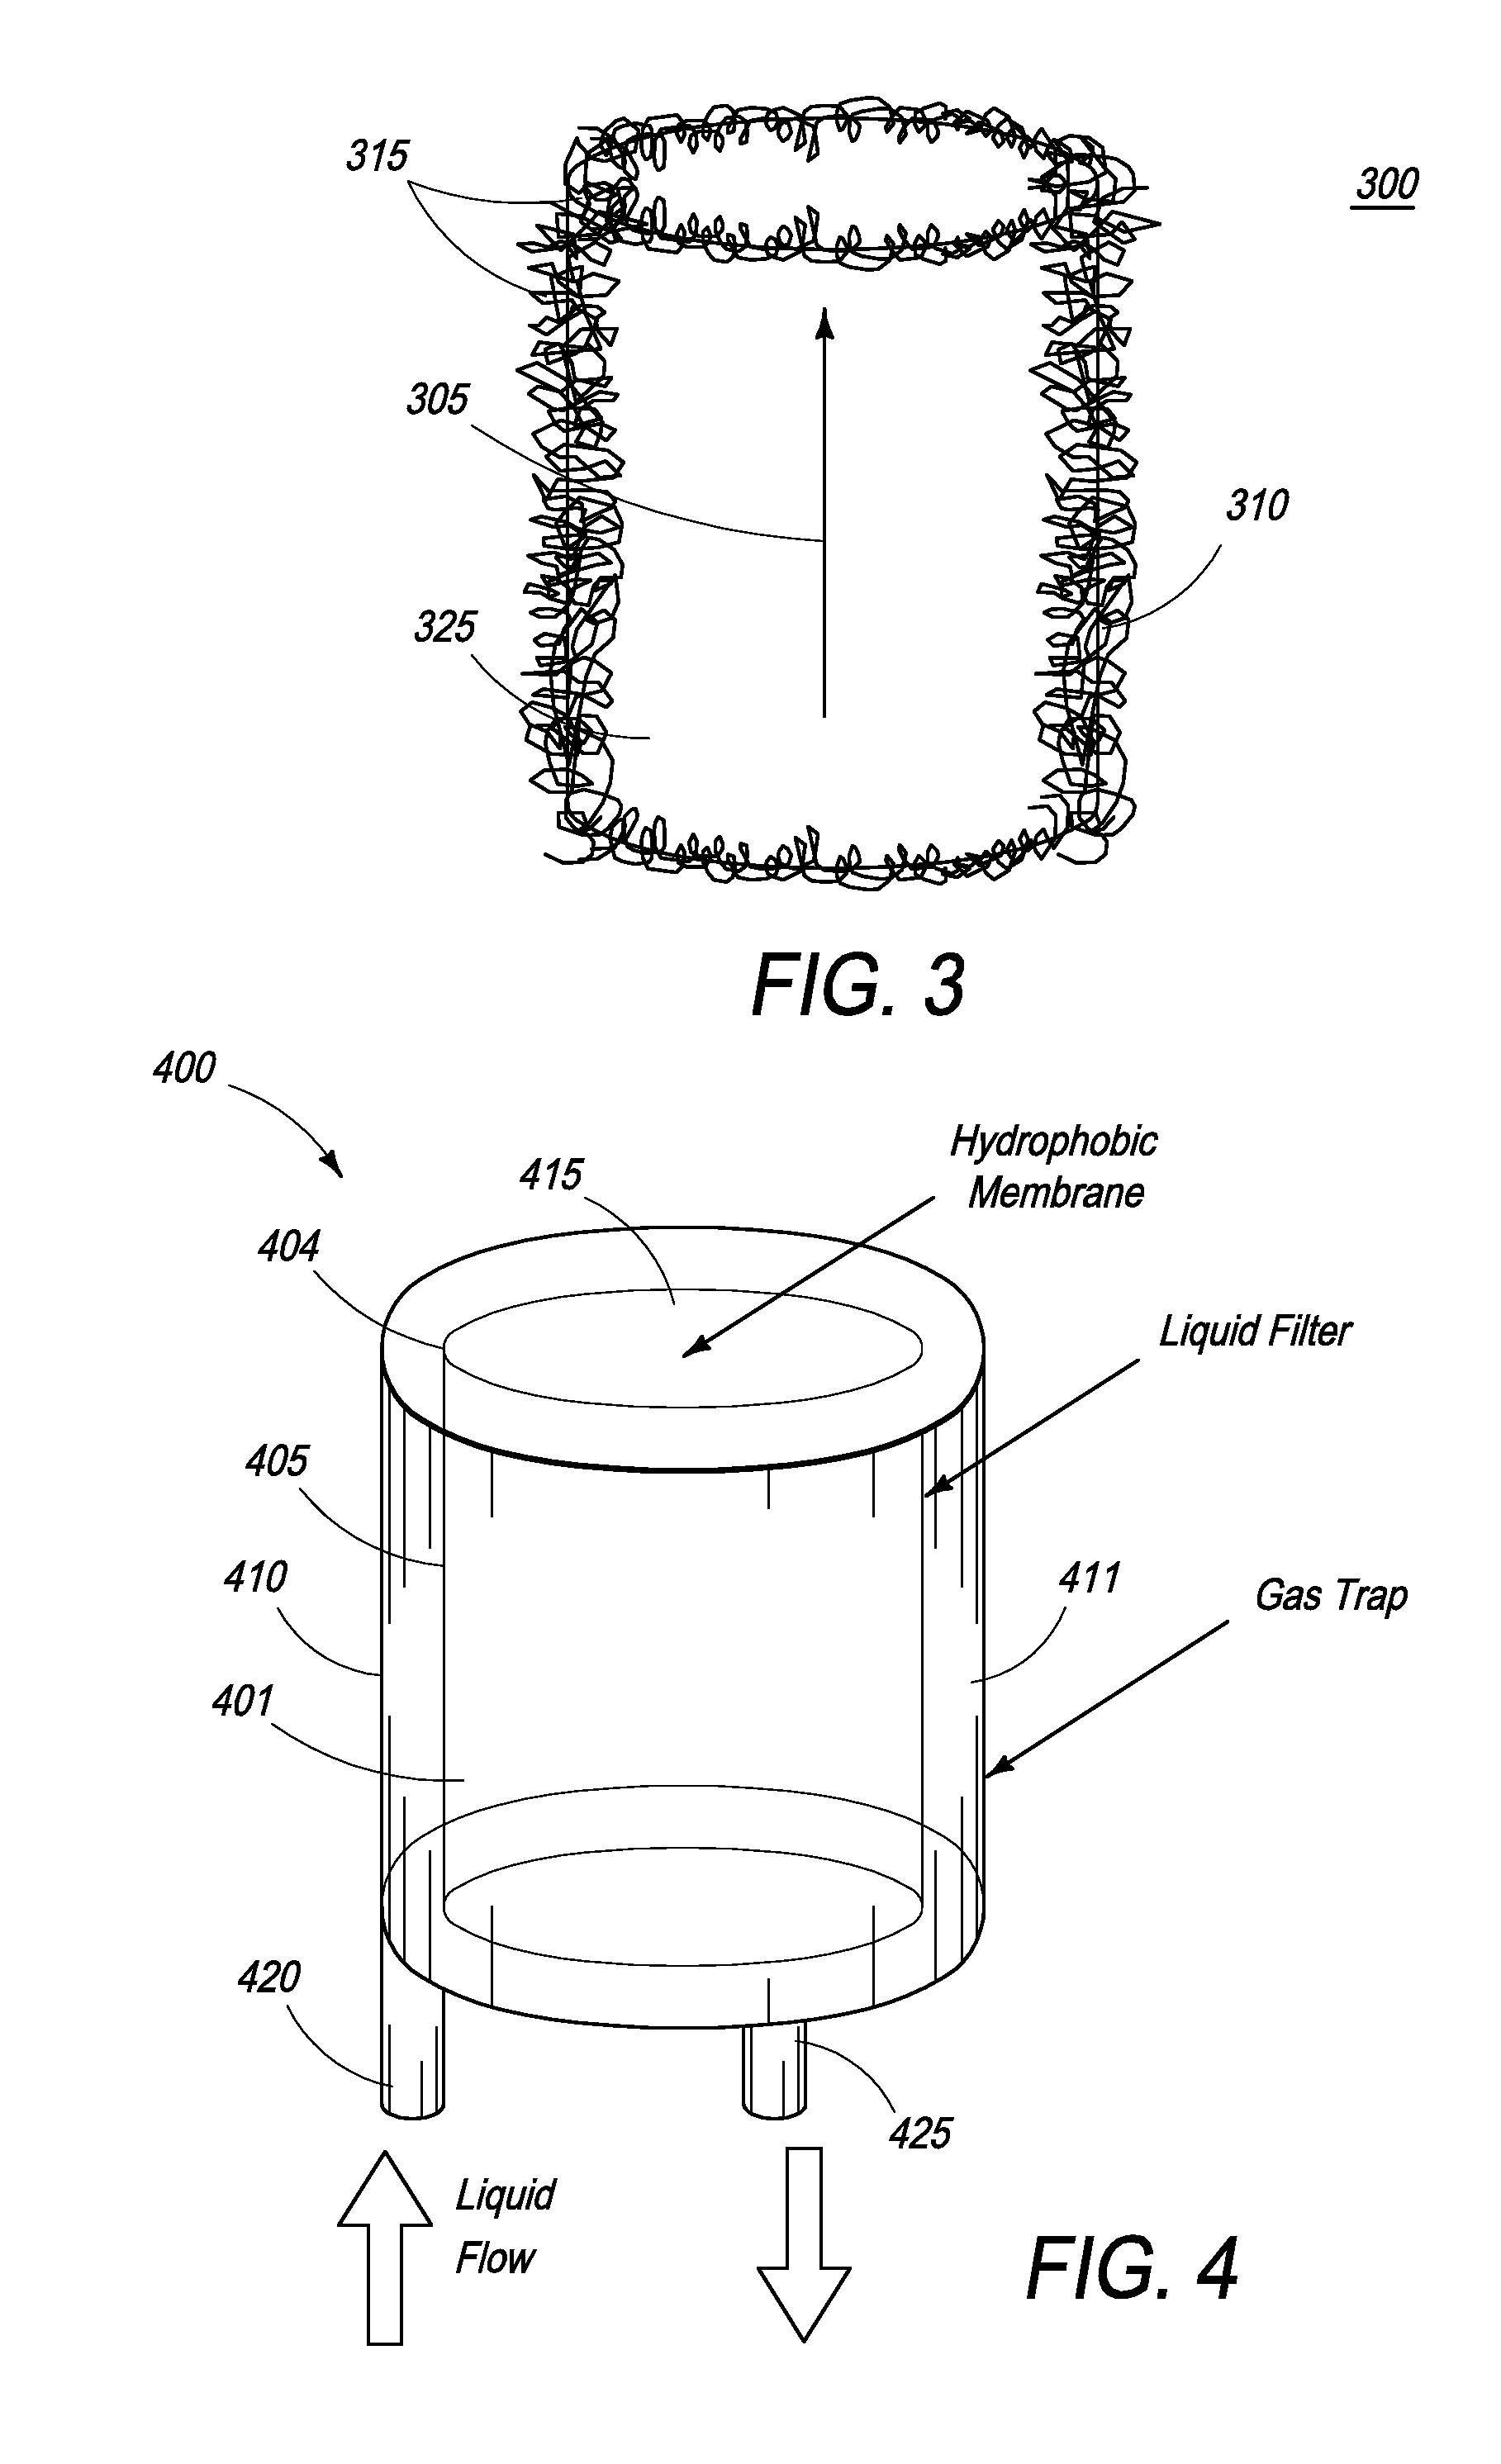 Carbon dioxide gas removal from a fluid circuit of a dialysis device